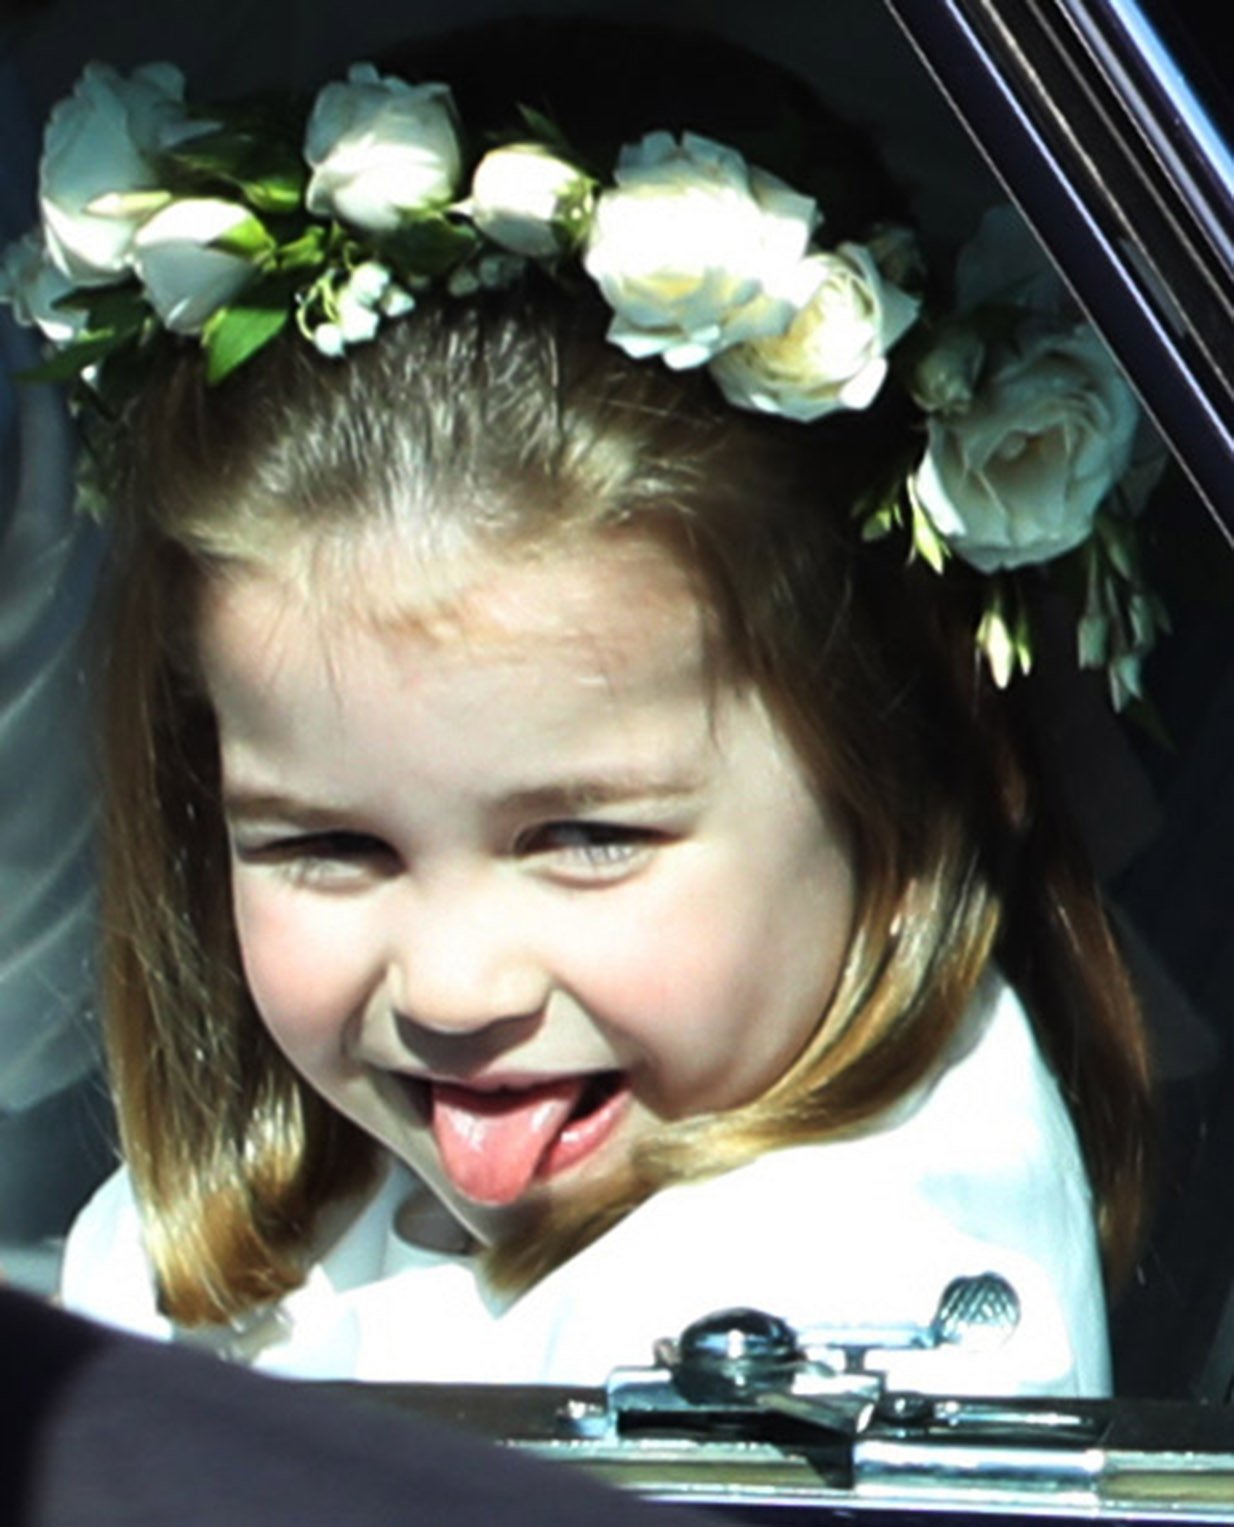 Princess Charlotte riding in a car to the wedding of Prince Harry and Meghan Markle at St George's Chapel in Windsor Castle on May 19, 2018 in Windsor, England. / Source: Getty Images